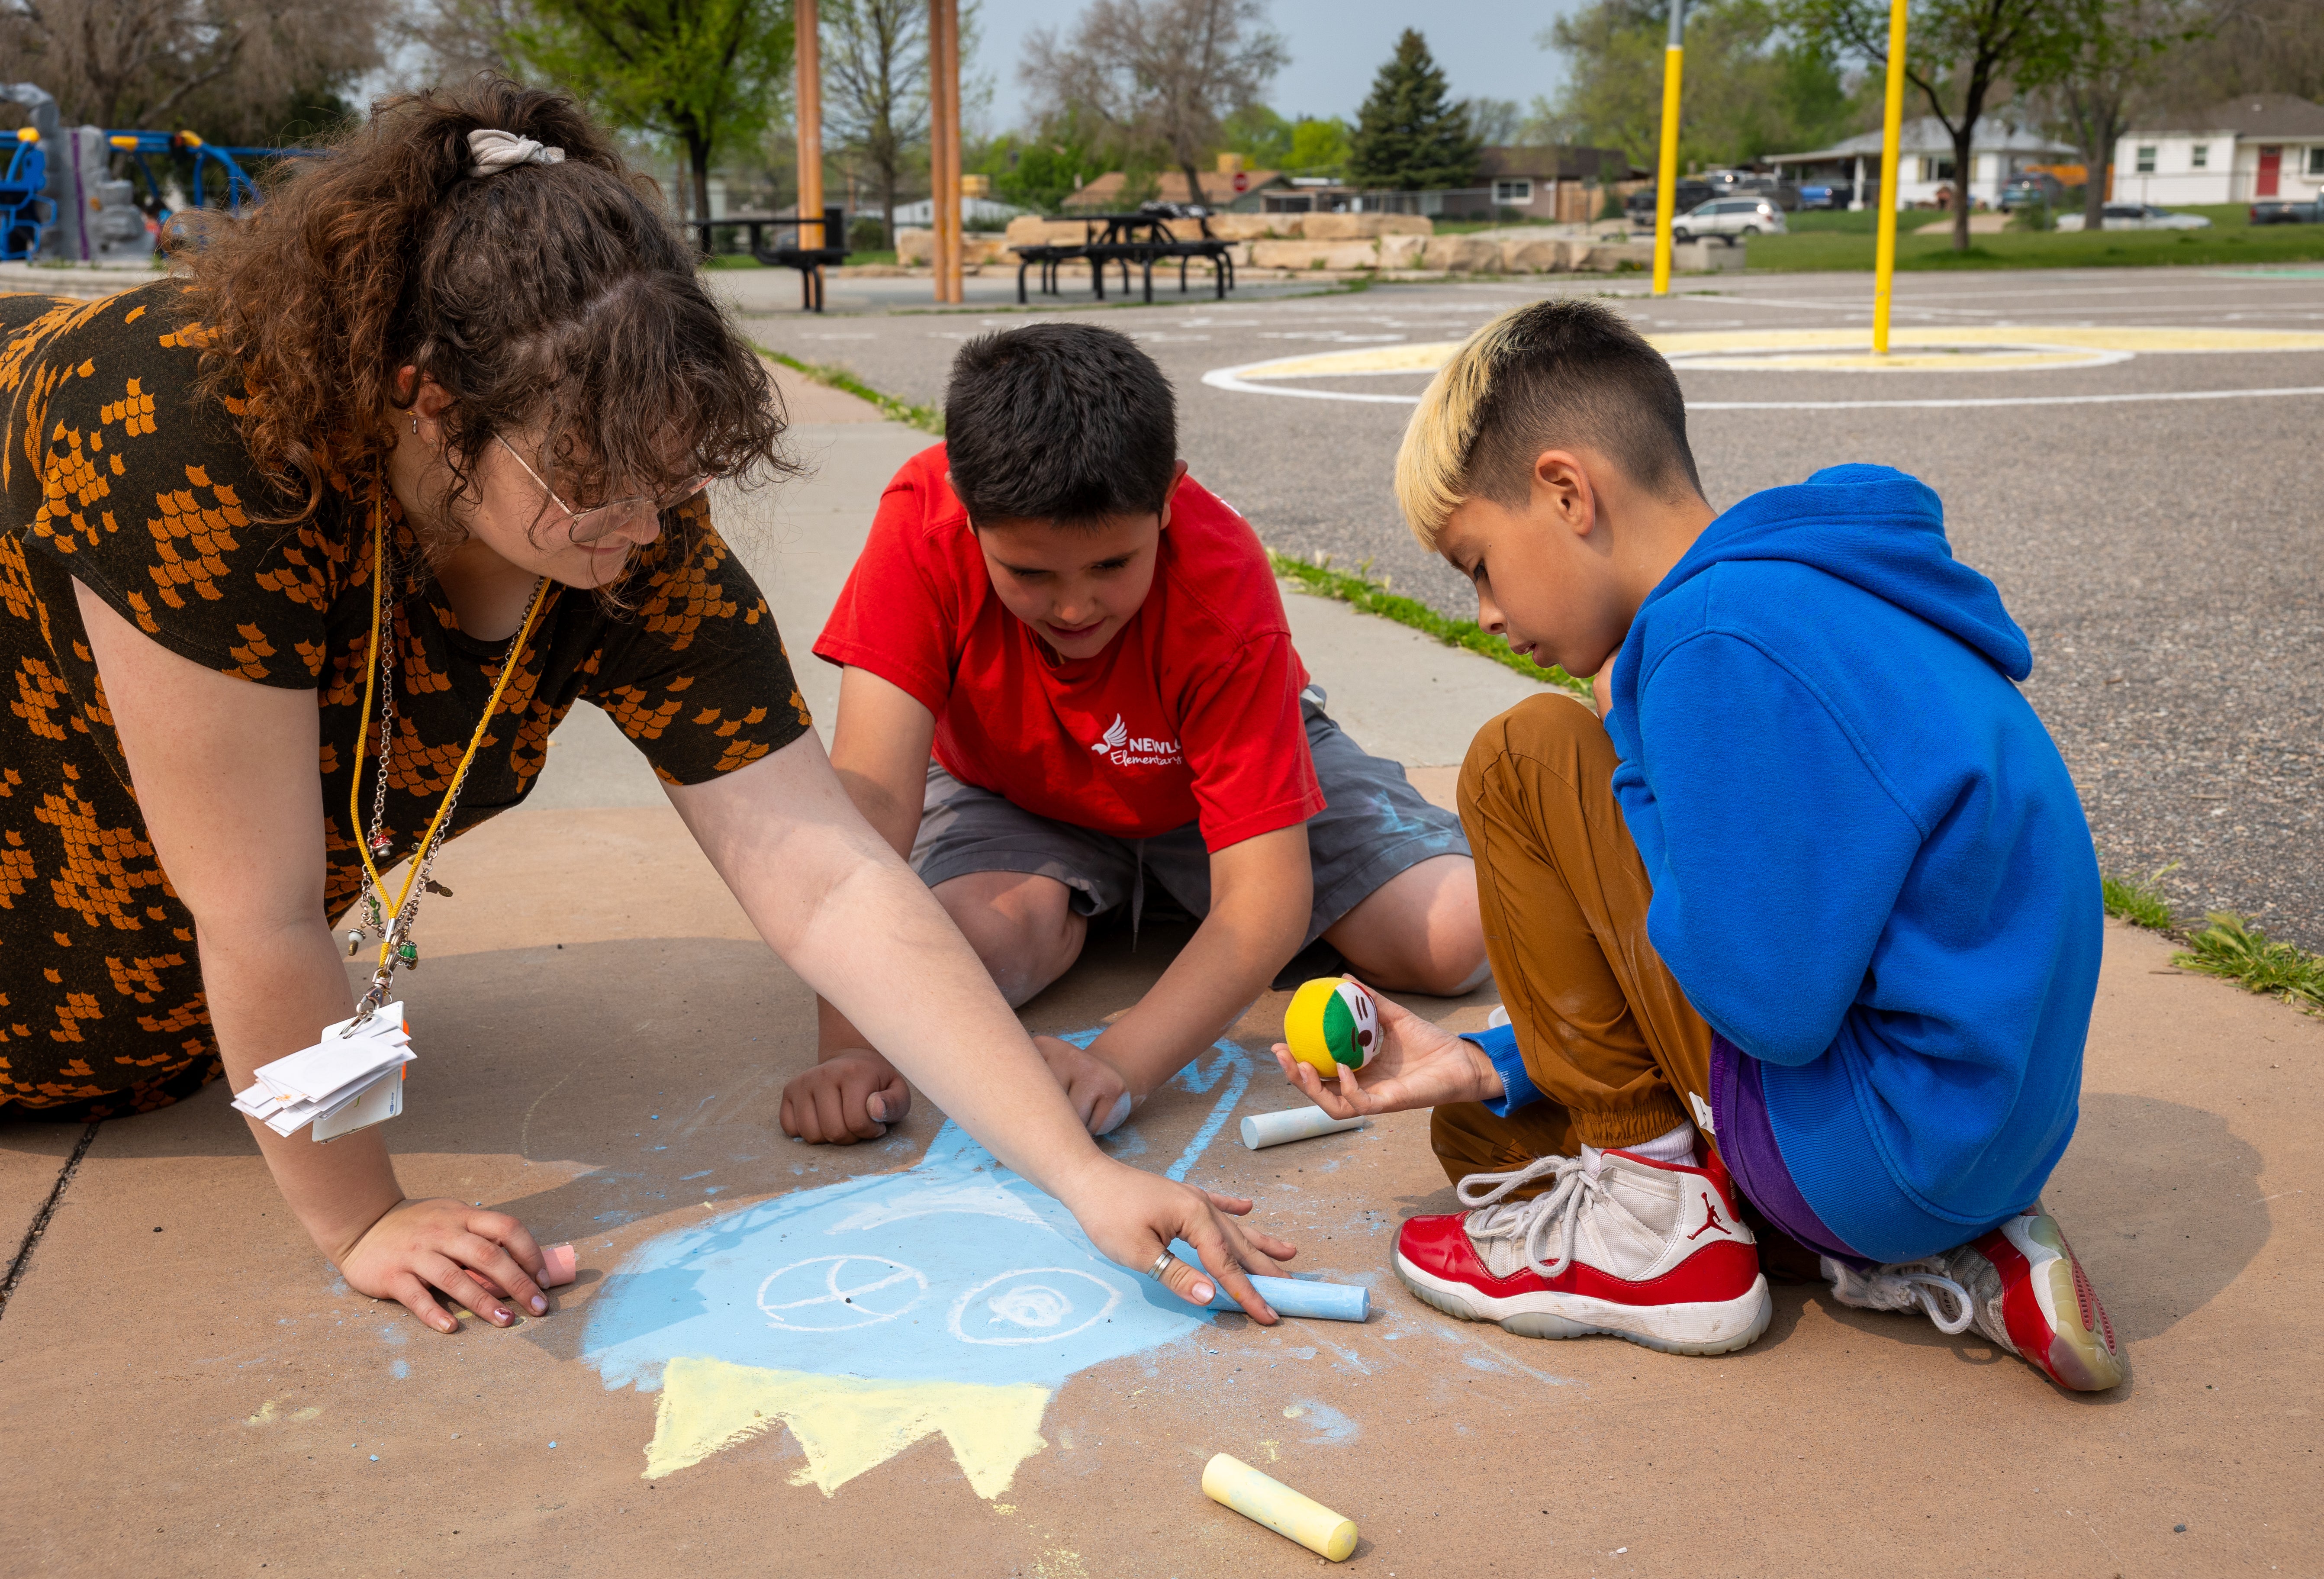 Students colour in a drawing on the sidewalk with chalk.